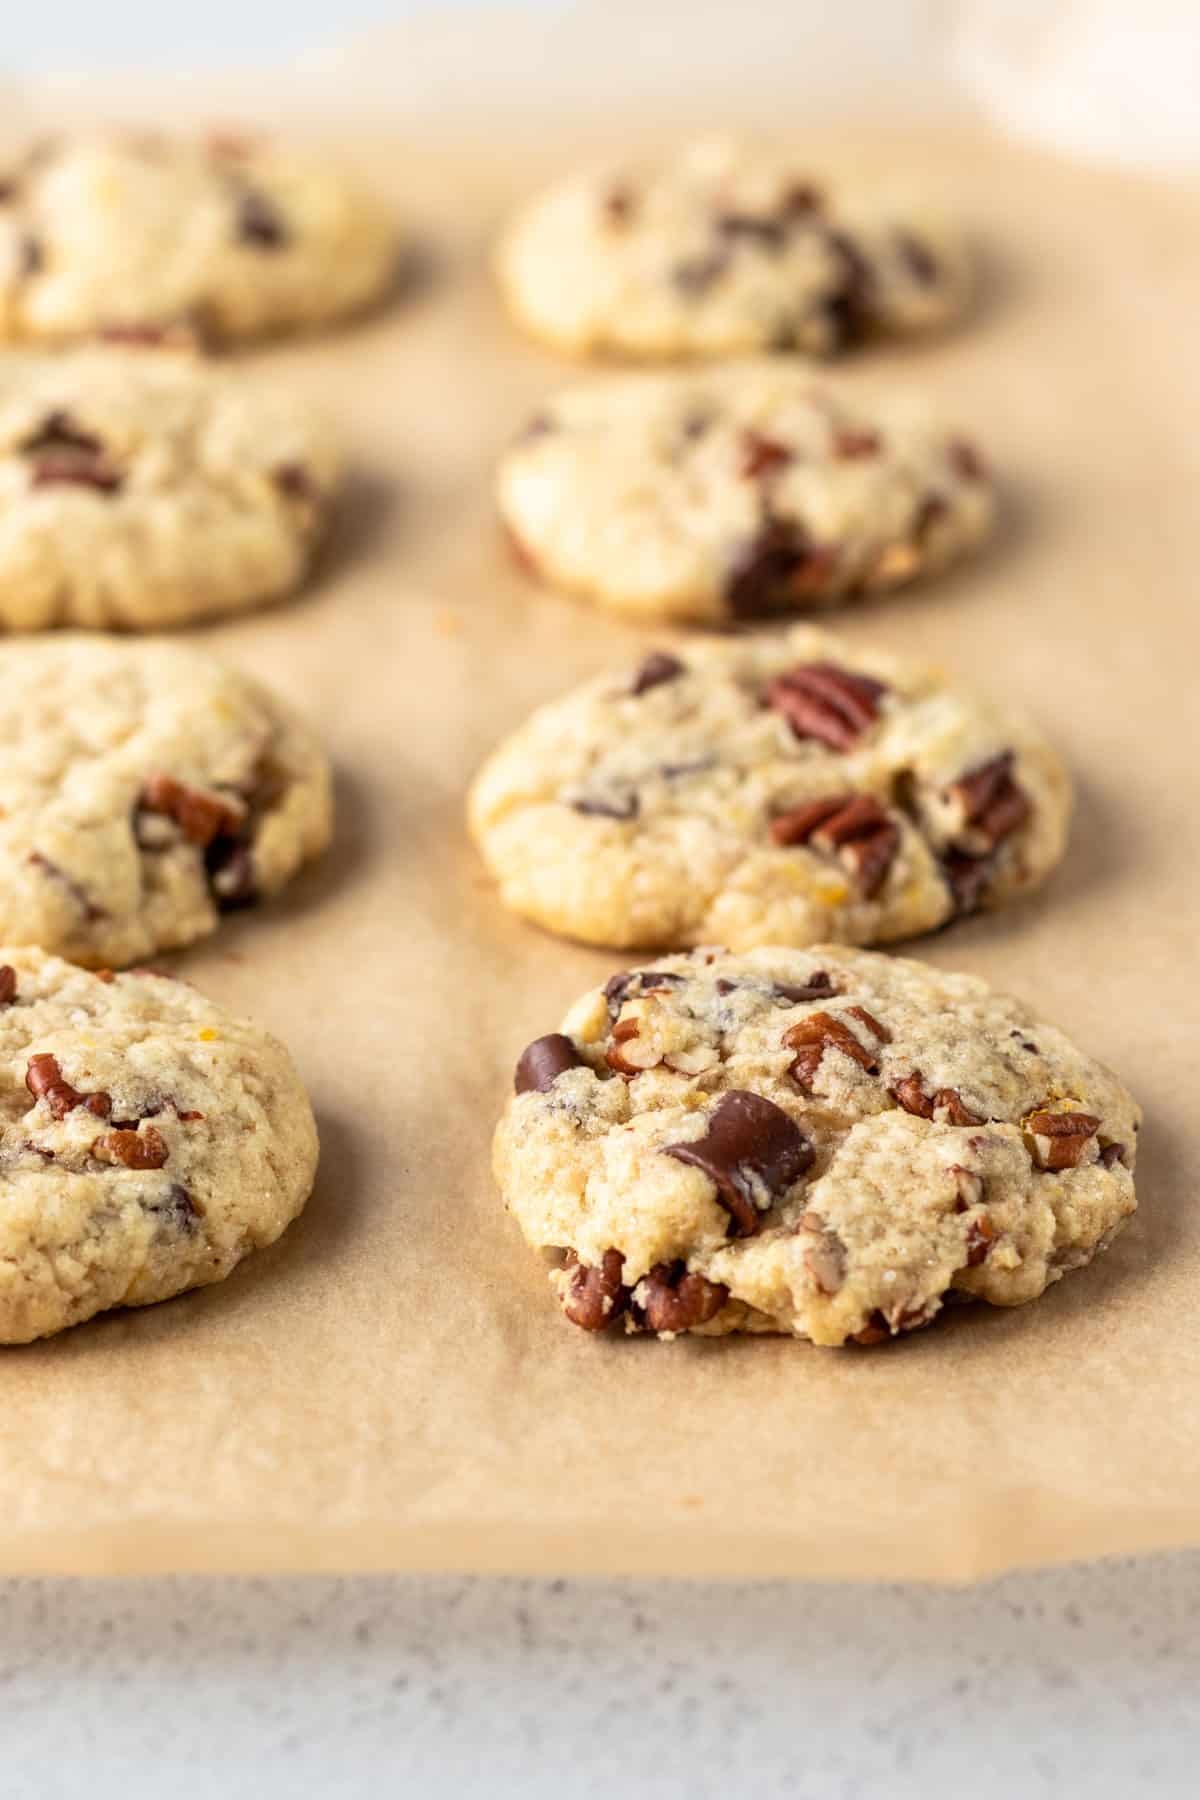 Chunky pecan cookies cooling on parchment paper.